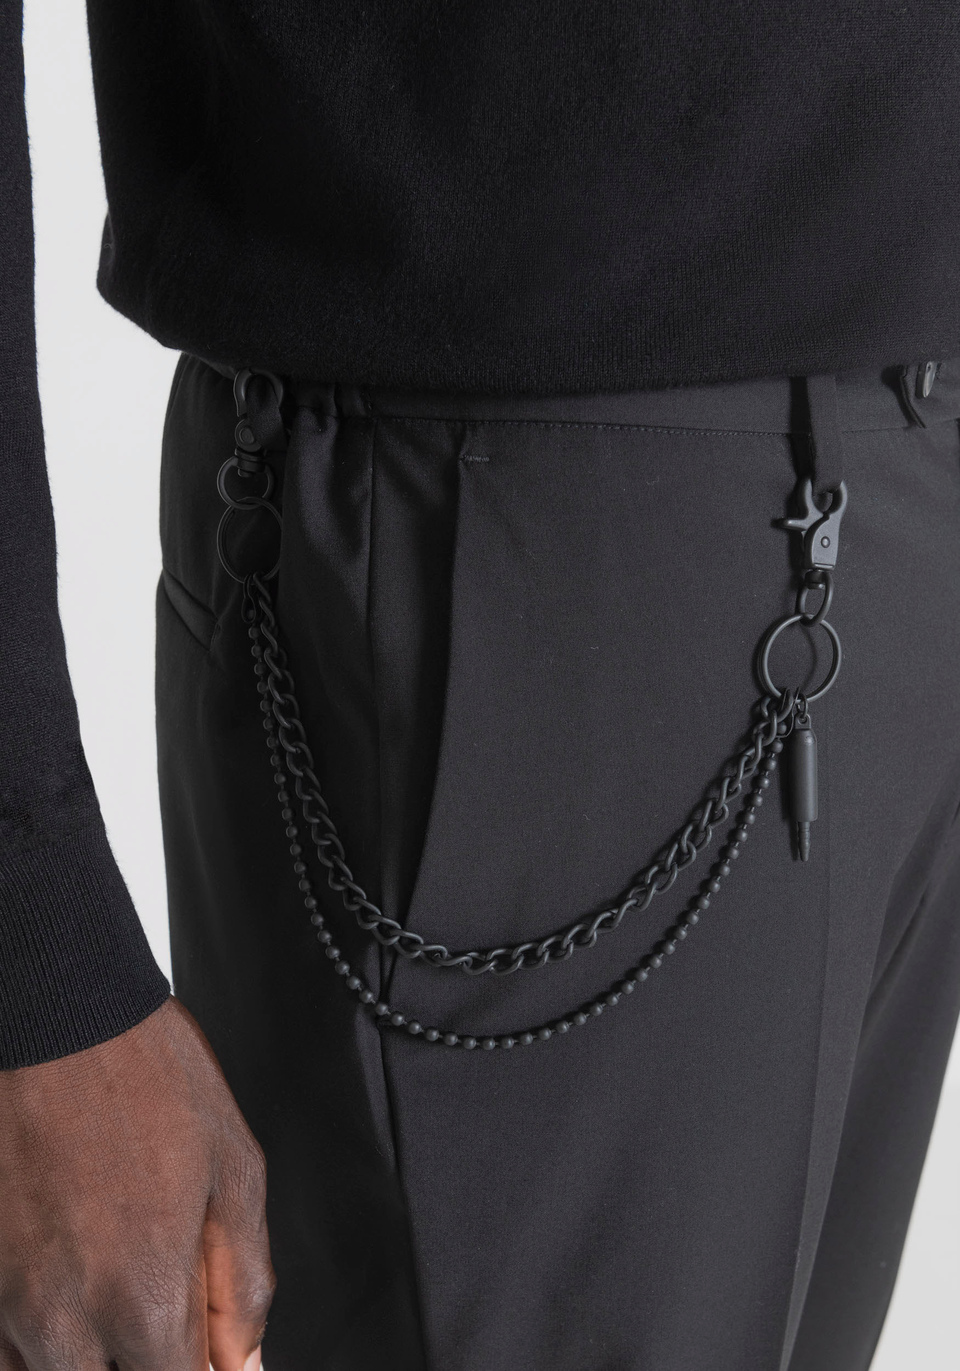 "RAD" SLIM-FIT ANKLE-LENGTH TROUSERS WITH CENTRAL CREASE - Antony Morato Online Shop